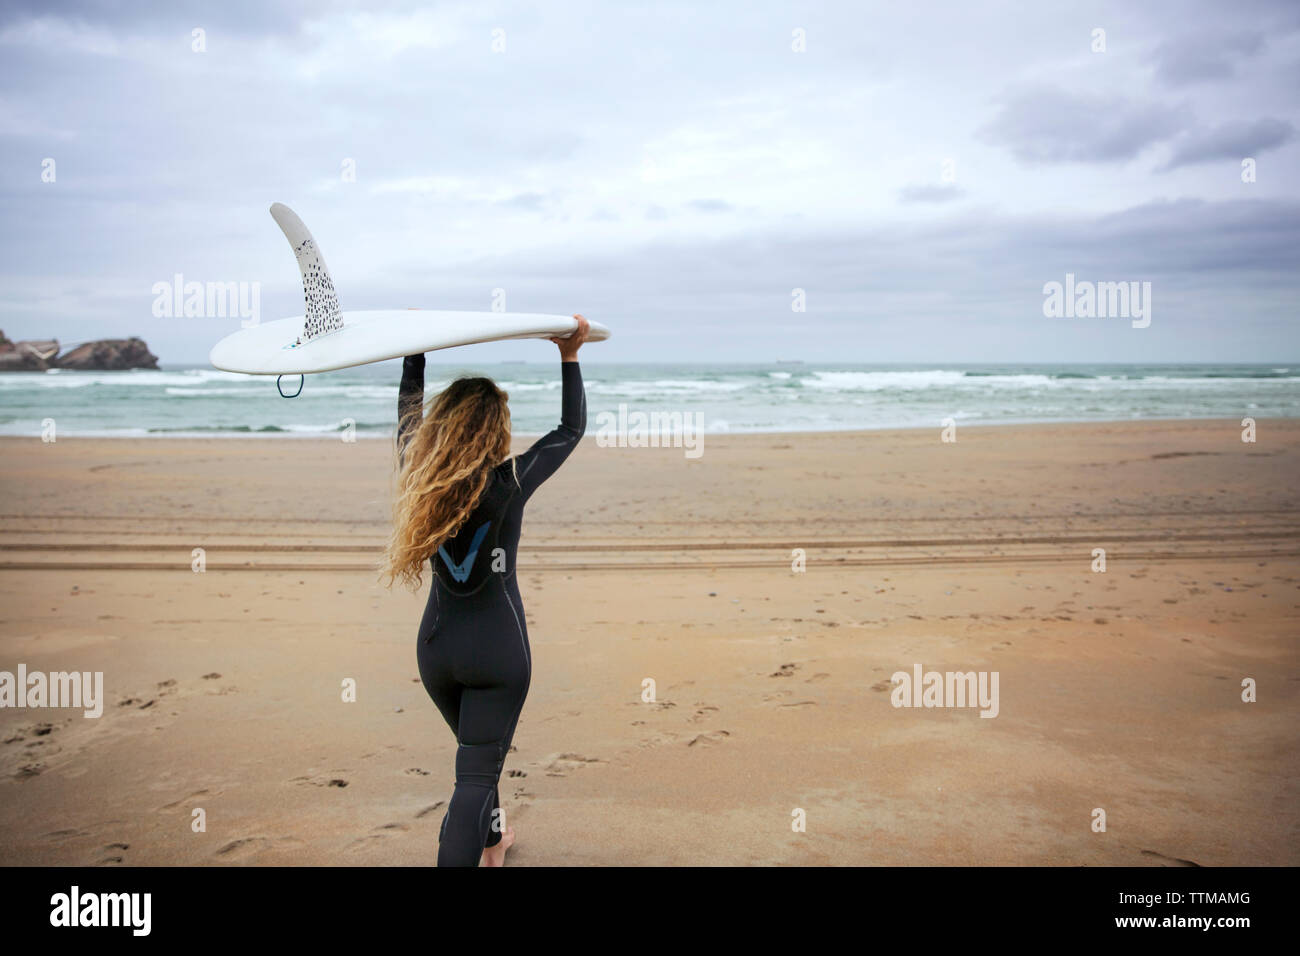 Woman carrying surfboard while walking on beach against sky Stock Photo